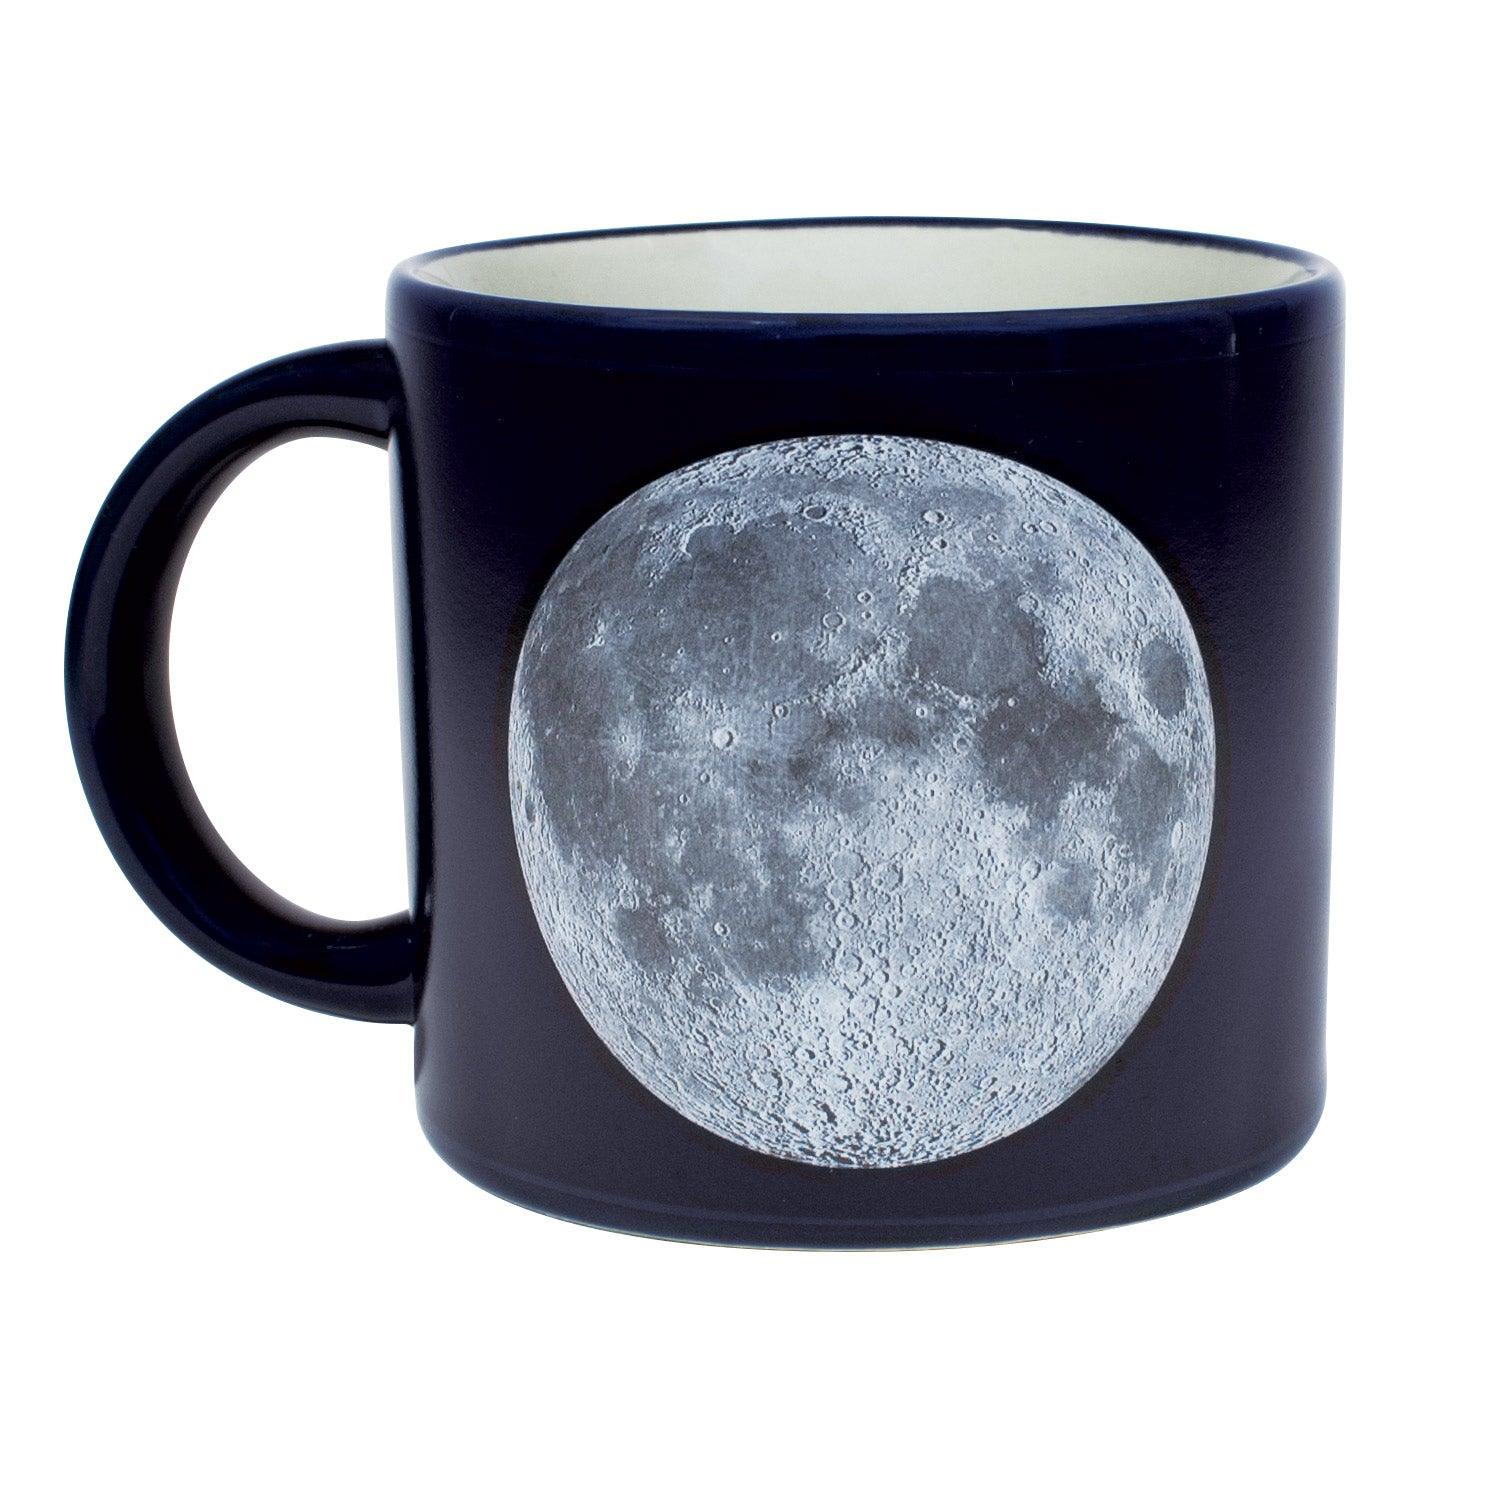 Product photo of Moon Heat-Changing Mug, a novelty gift manufactured by The Unemployed Philosophers Guild.